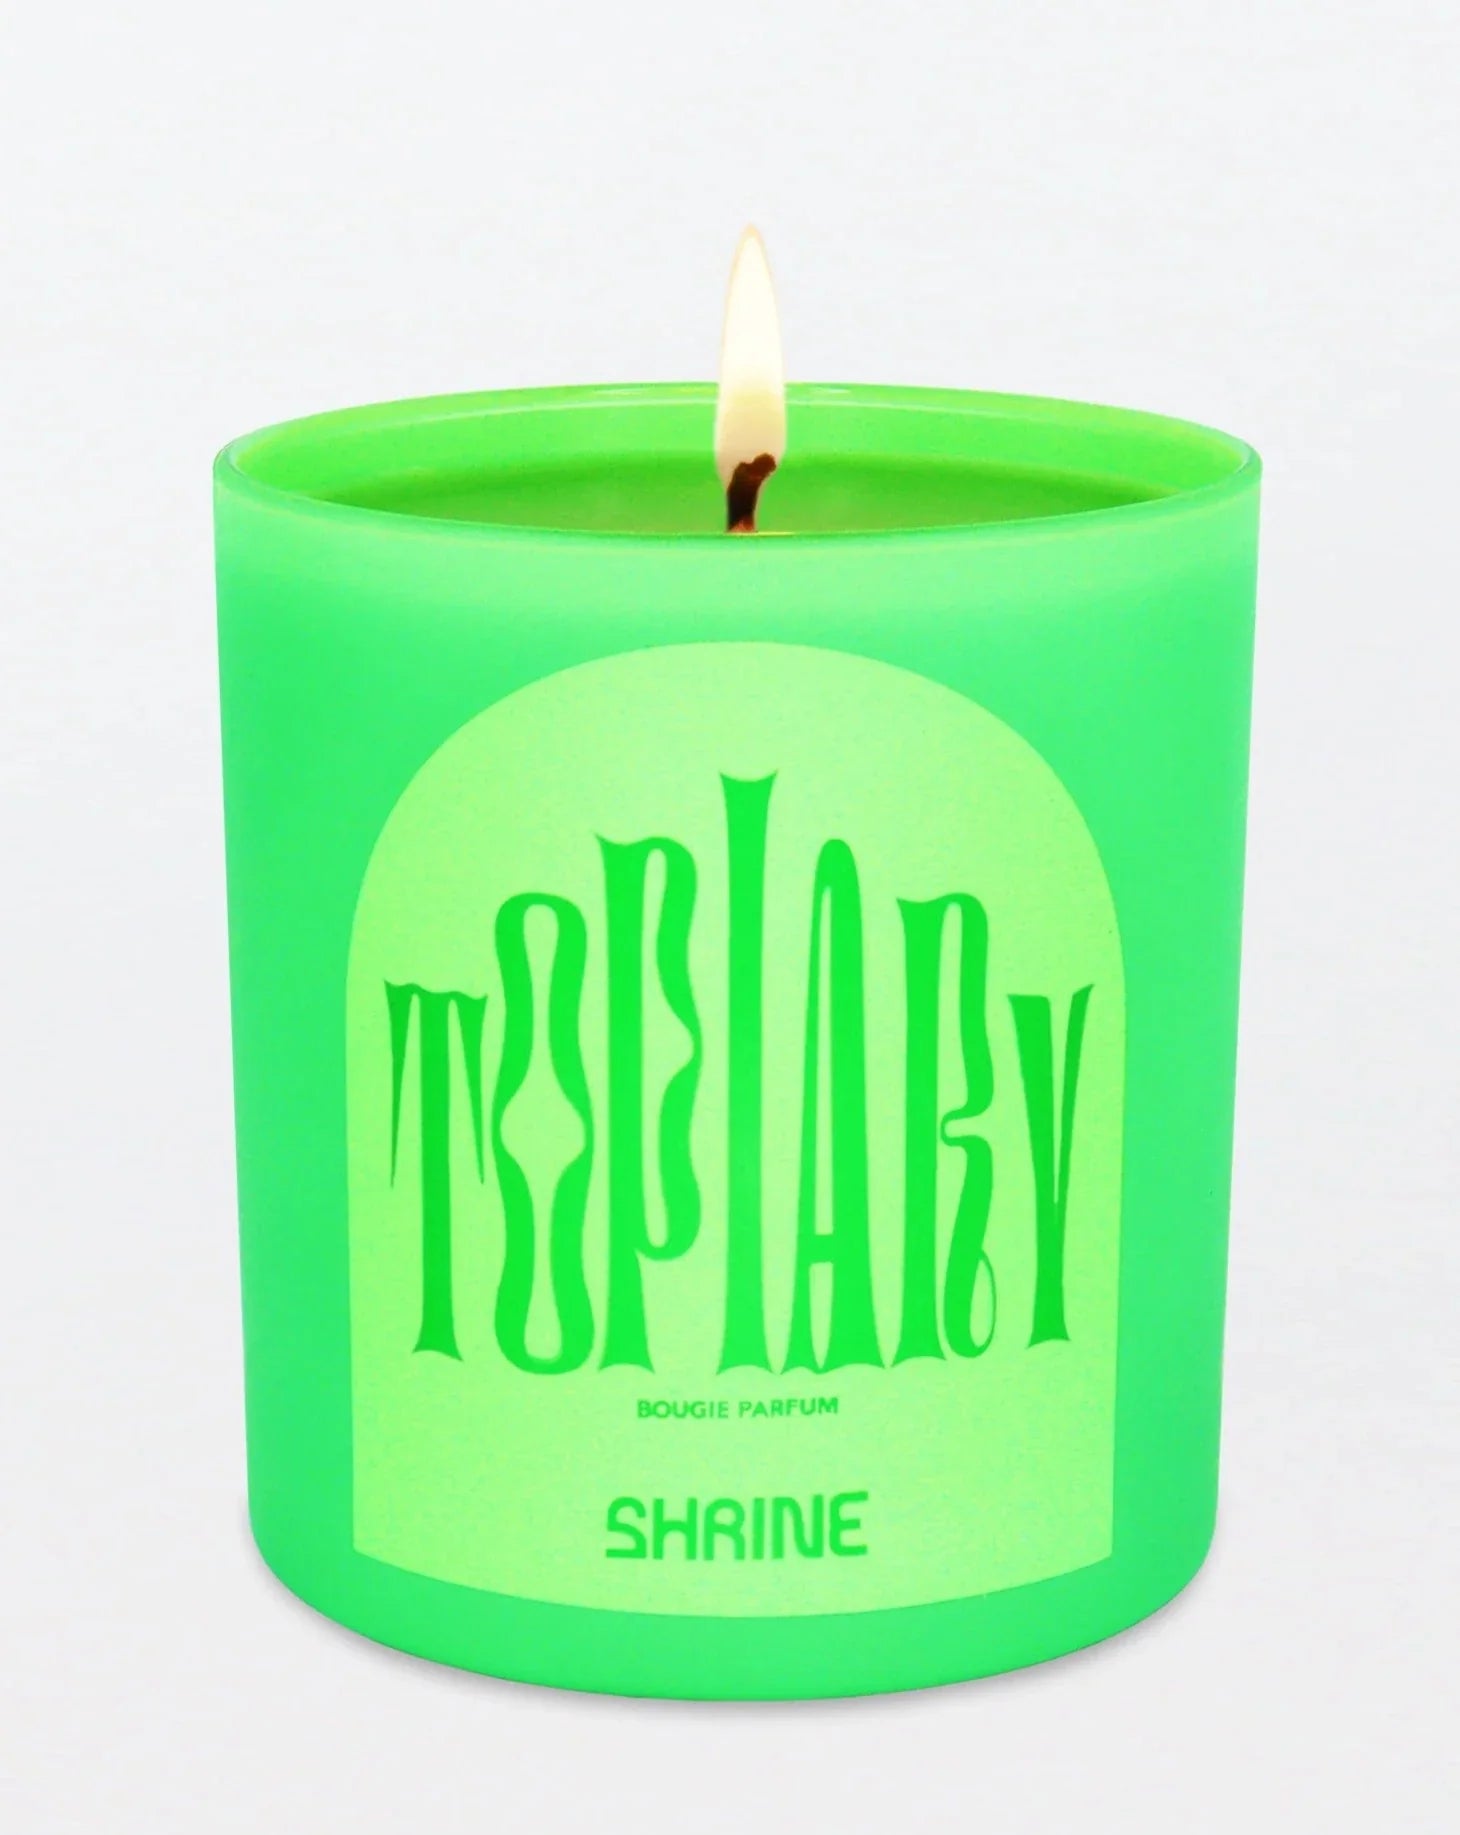 Shrine candle available at Easy Tiger Toronto